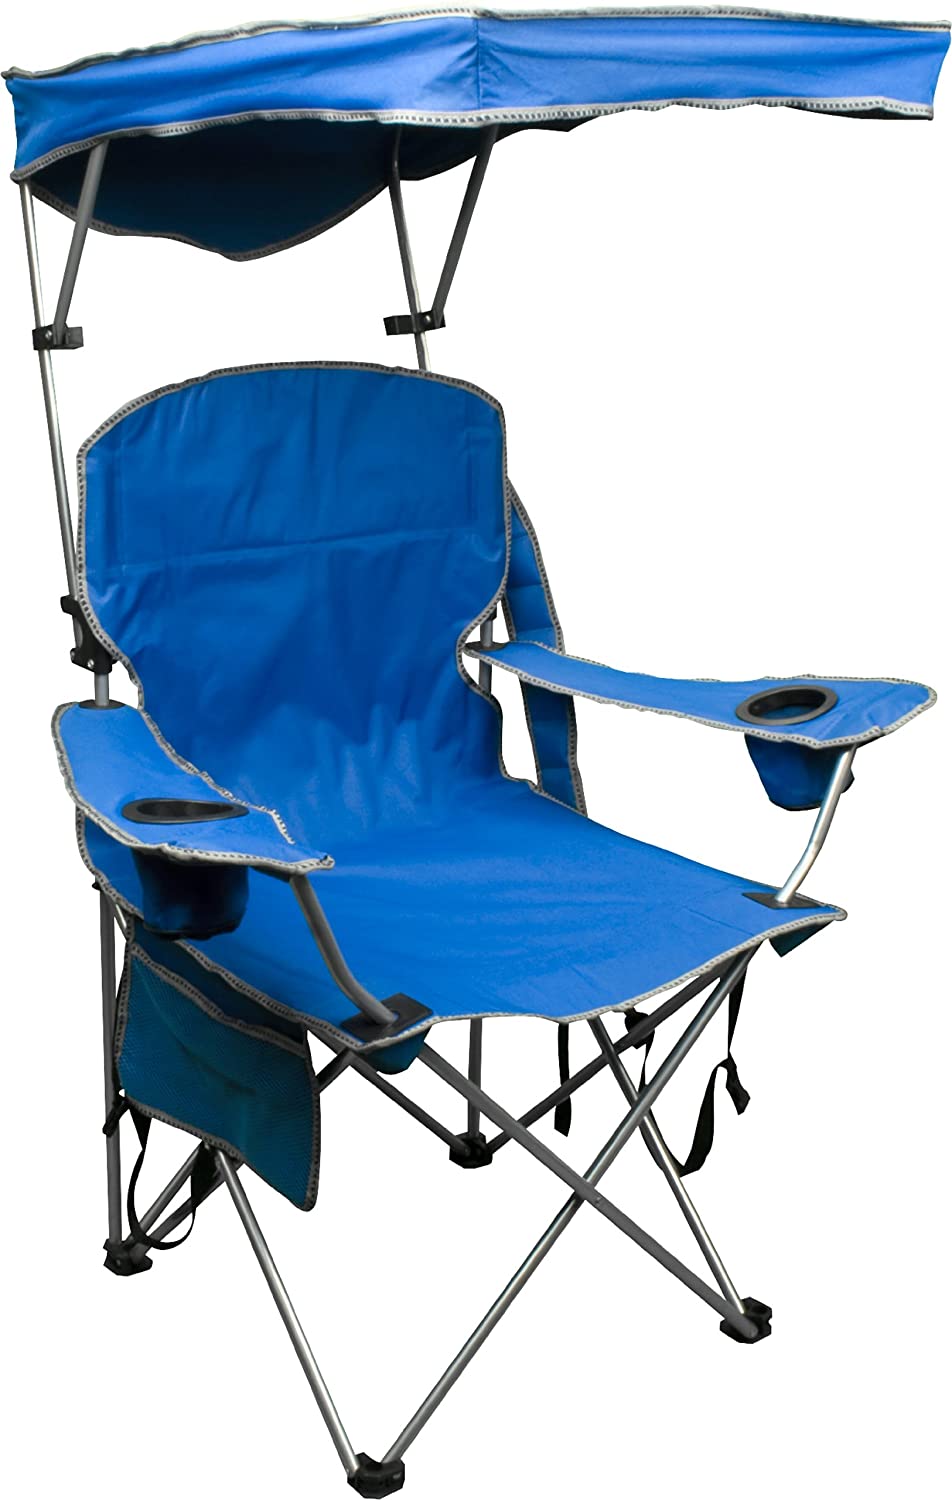 quik shade canopy chair